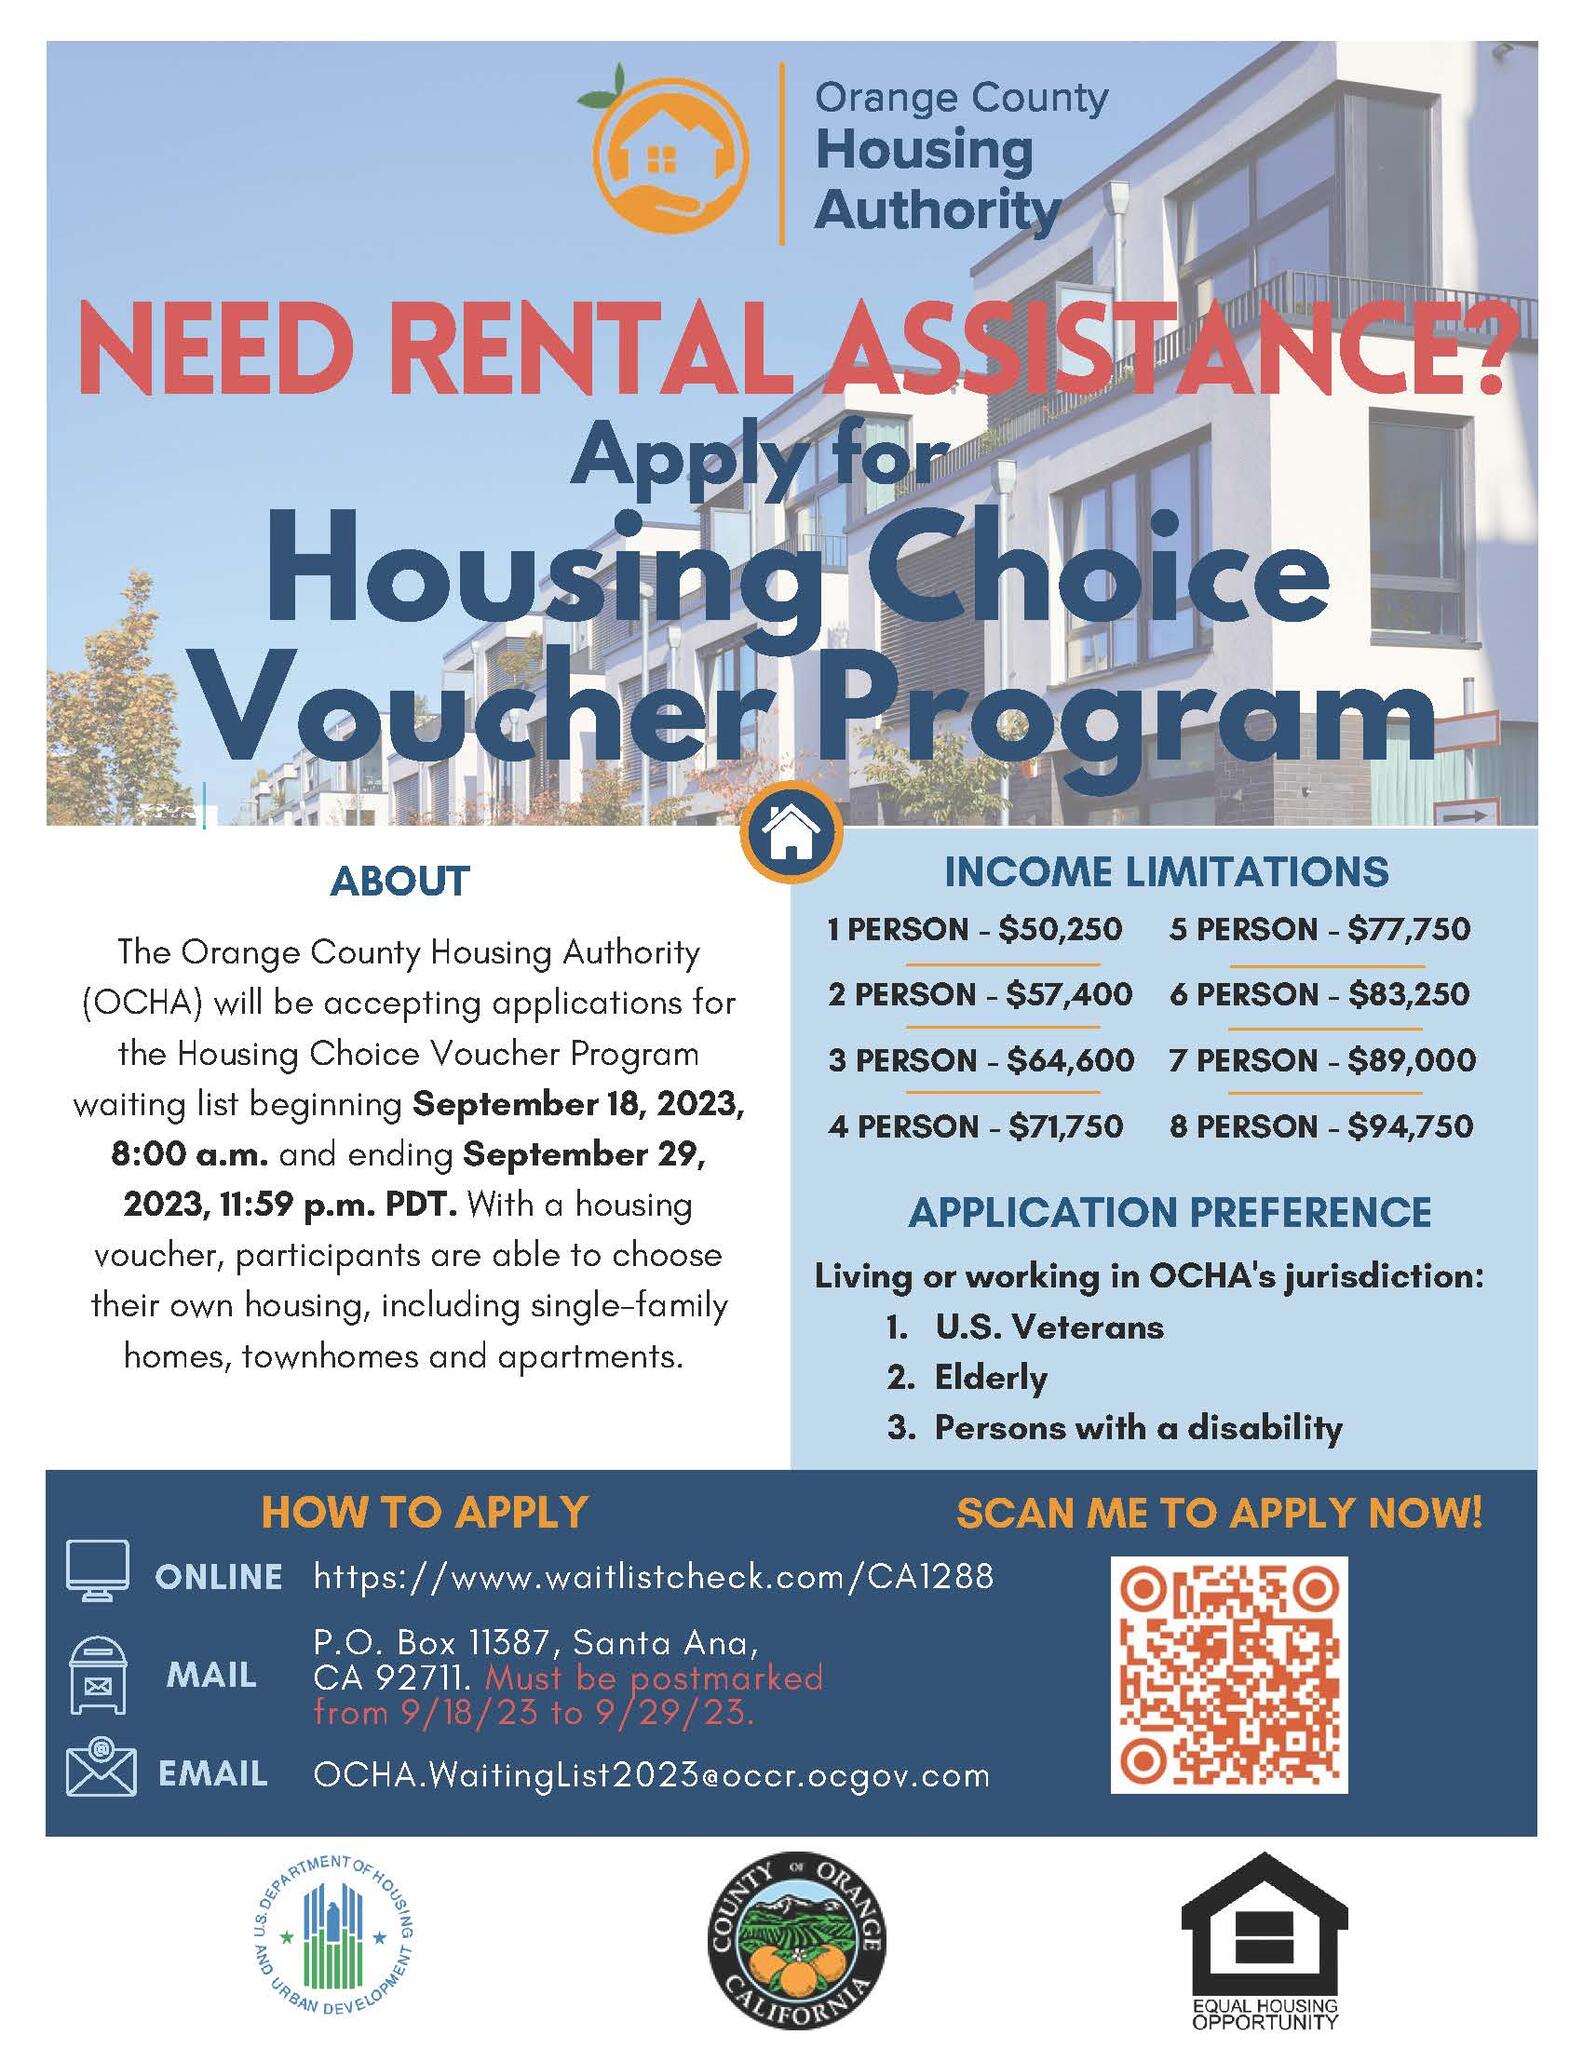 The Orange County Housing Authority (OCHA) is accepting applications